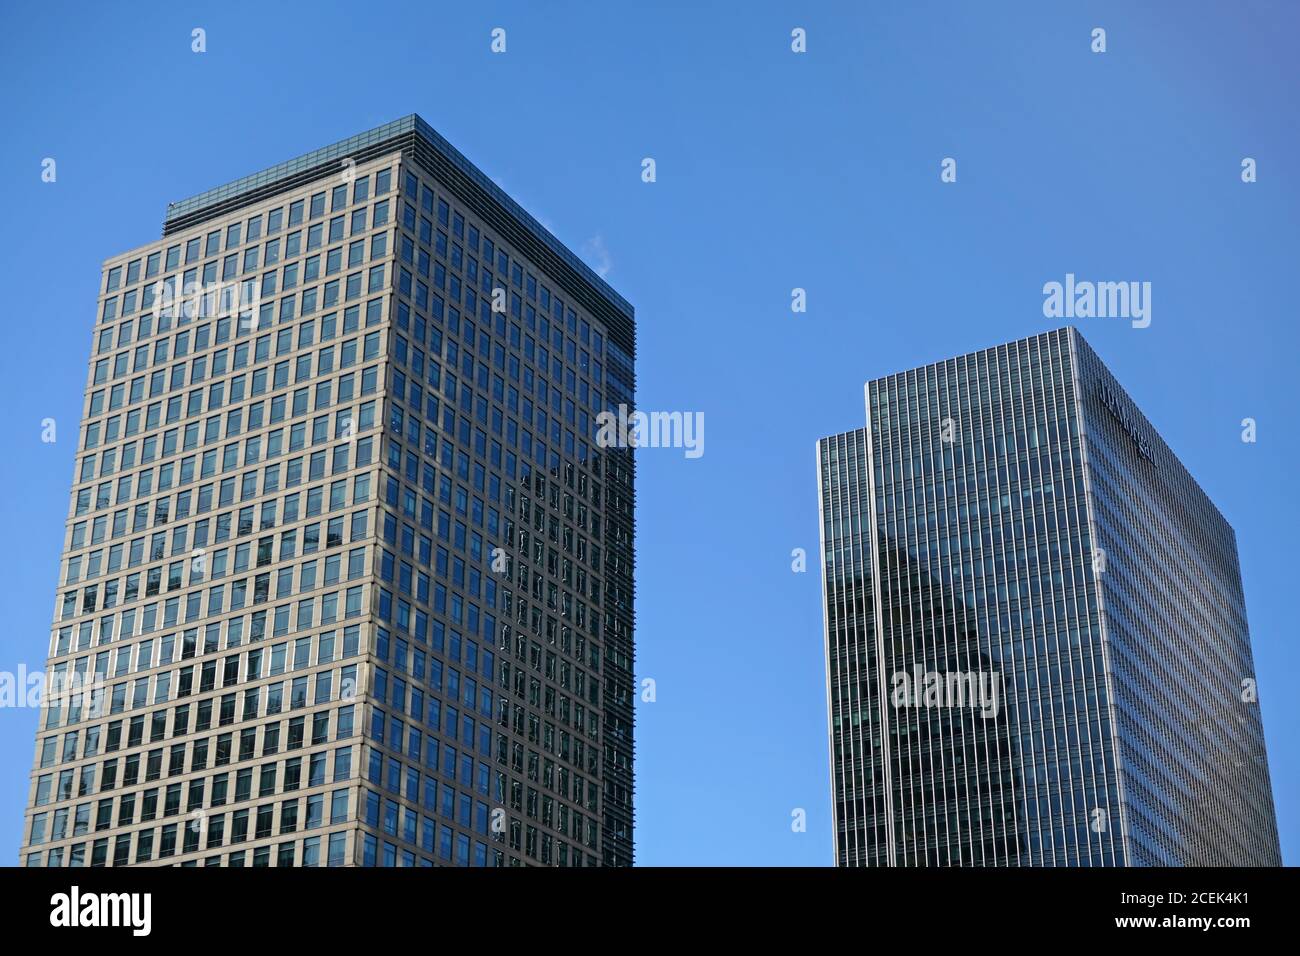 London, United Kingdom - February 03, 2019: 40 and 25 Bank Street buildings designed by Cesar Pelli & Associates on sunny day. Most of skyscrapers in Stock Photo